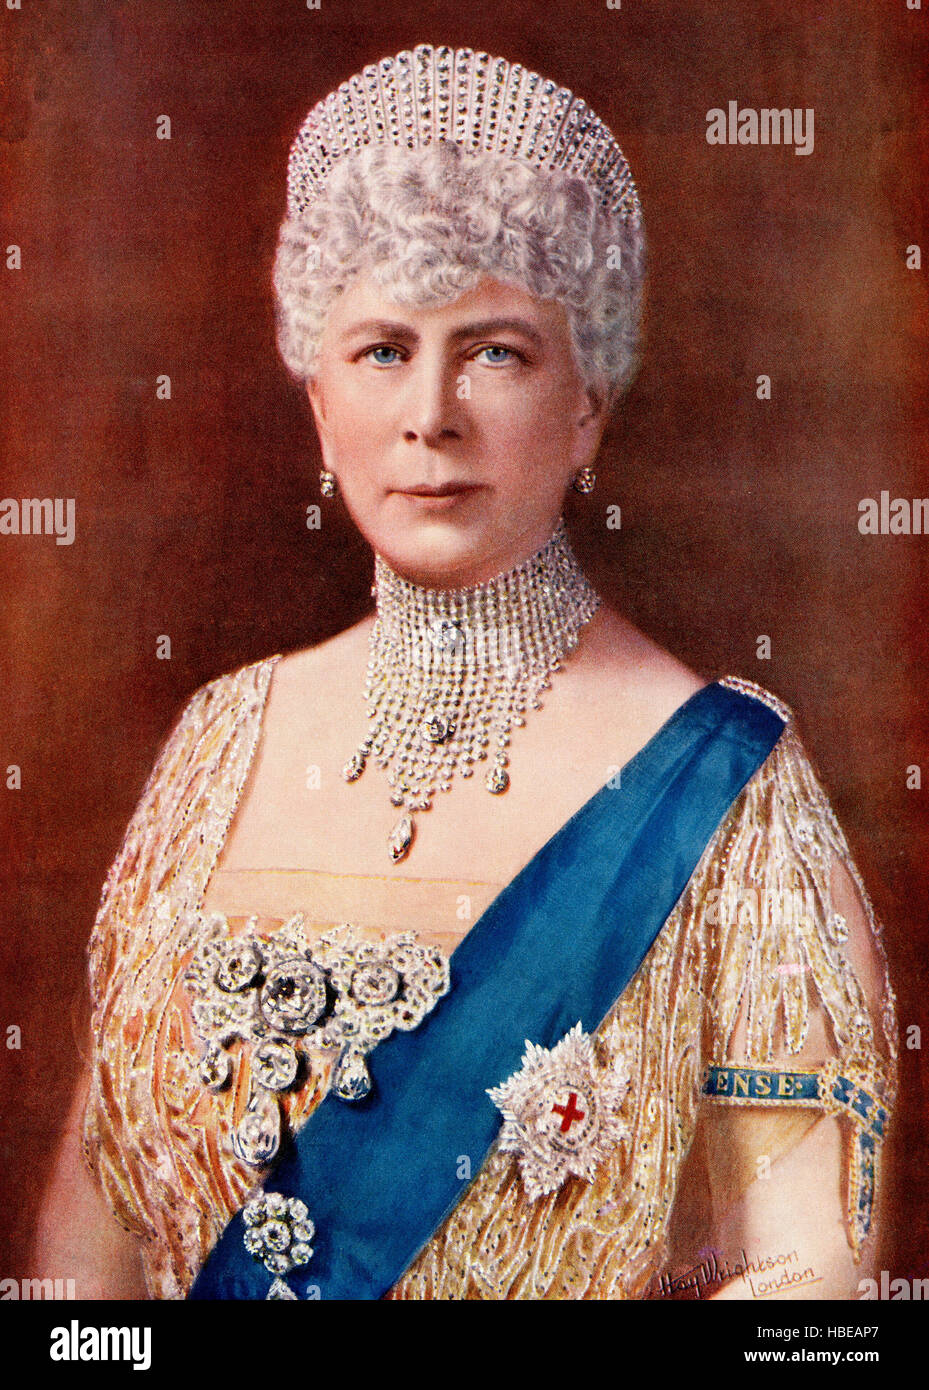 Mary of Teck New Photo 6 Sizes! Queen Consort of King George V of the UK